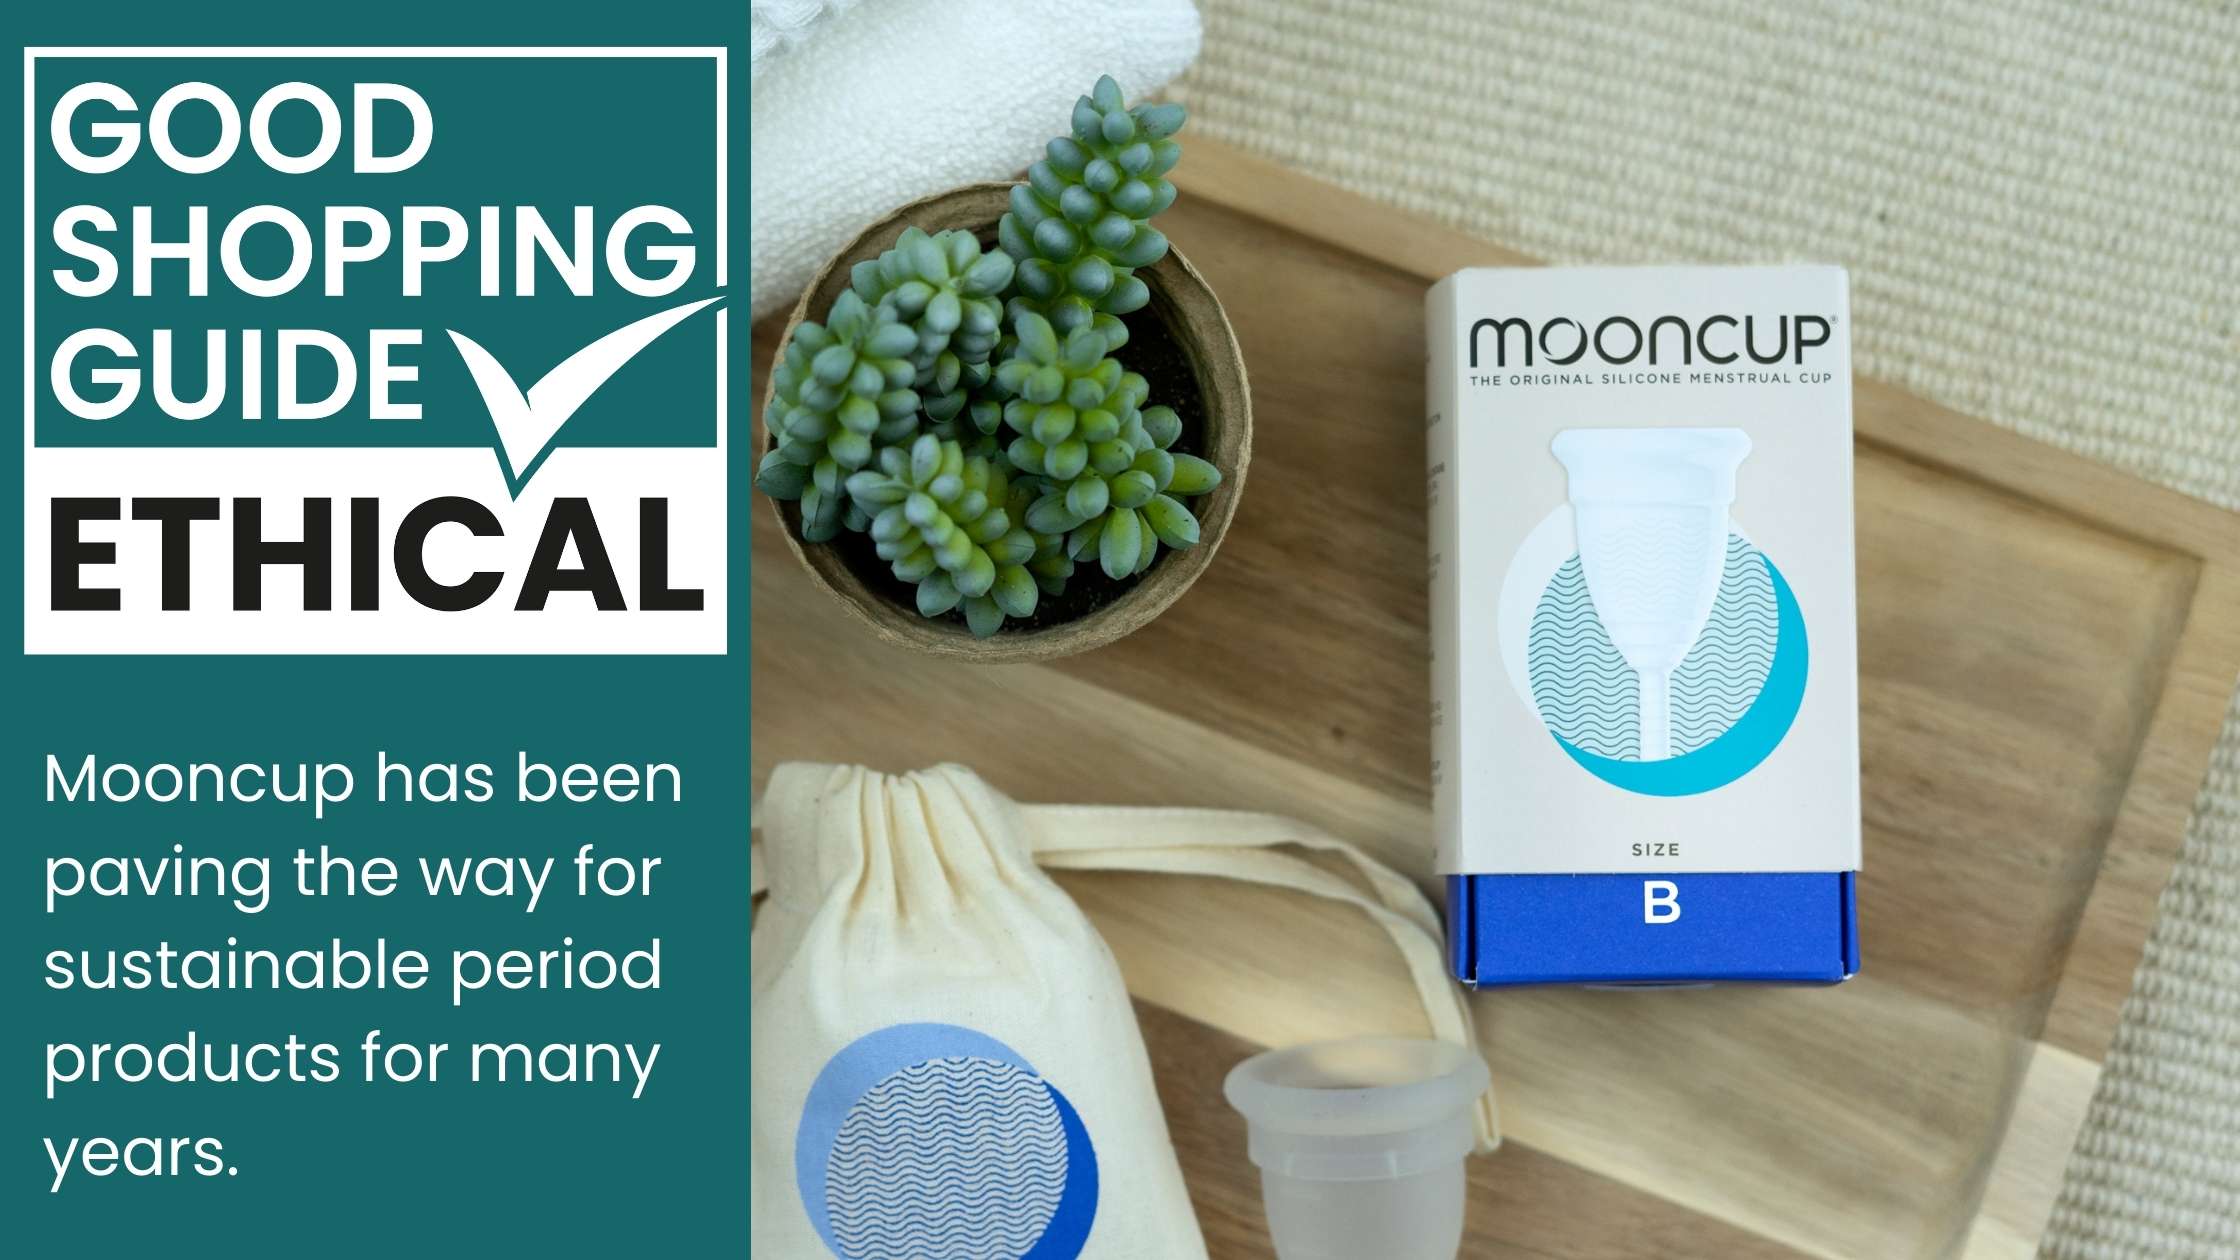 Mooncup ethical and sustainable period products accredited by The Good Shopping Guide